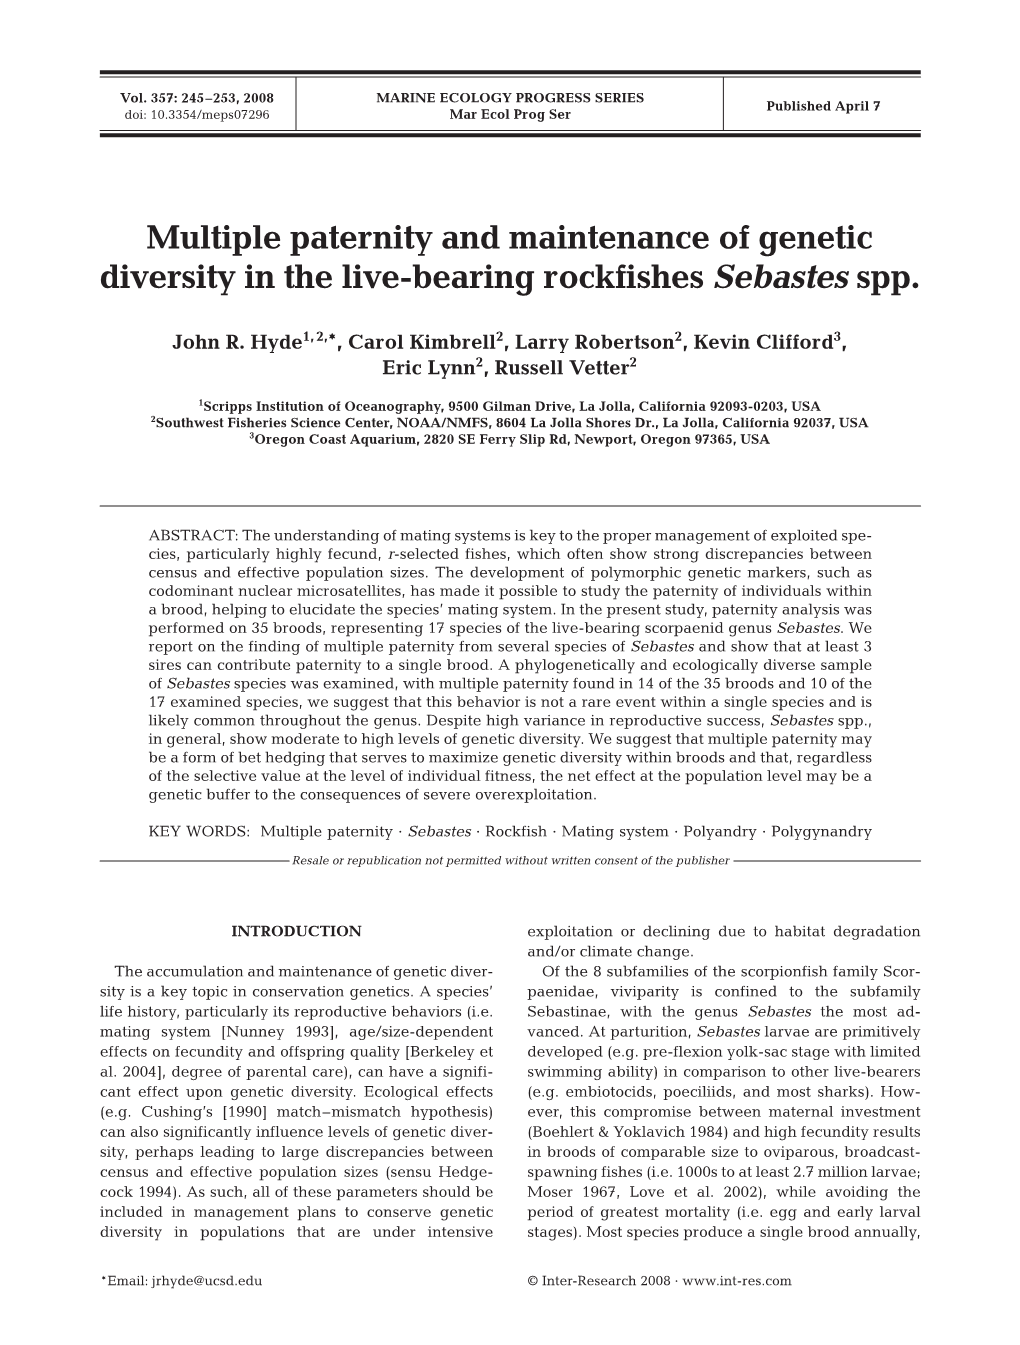 Multiple Paternity and Maintenance of Genetic Diversity in the Live-Bearing Rockfishes Sebastes Spp